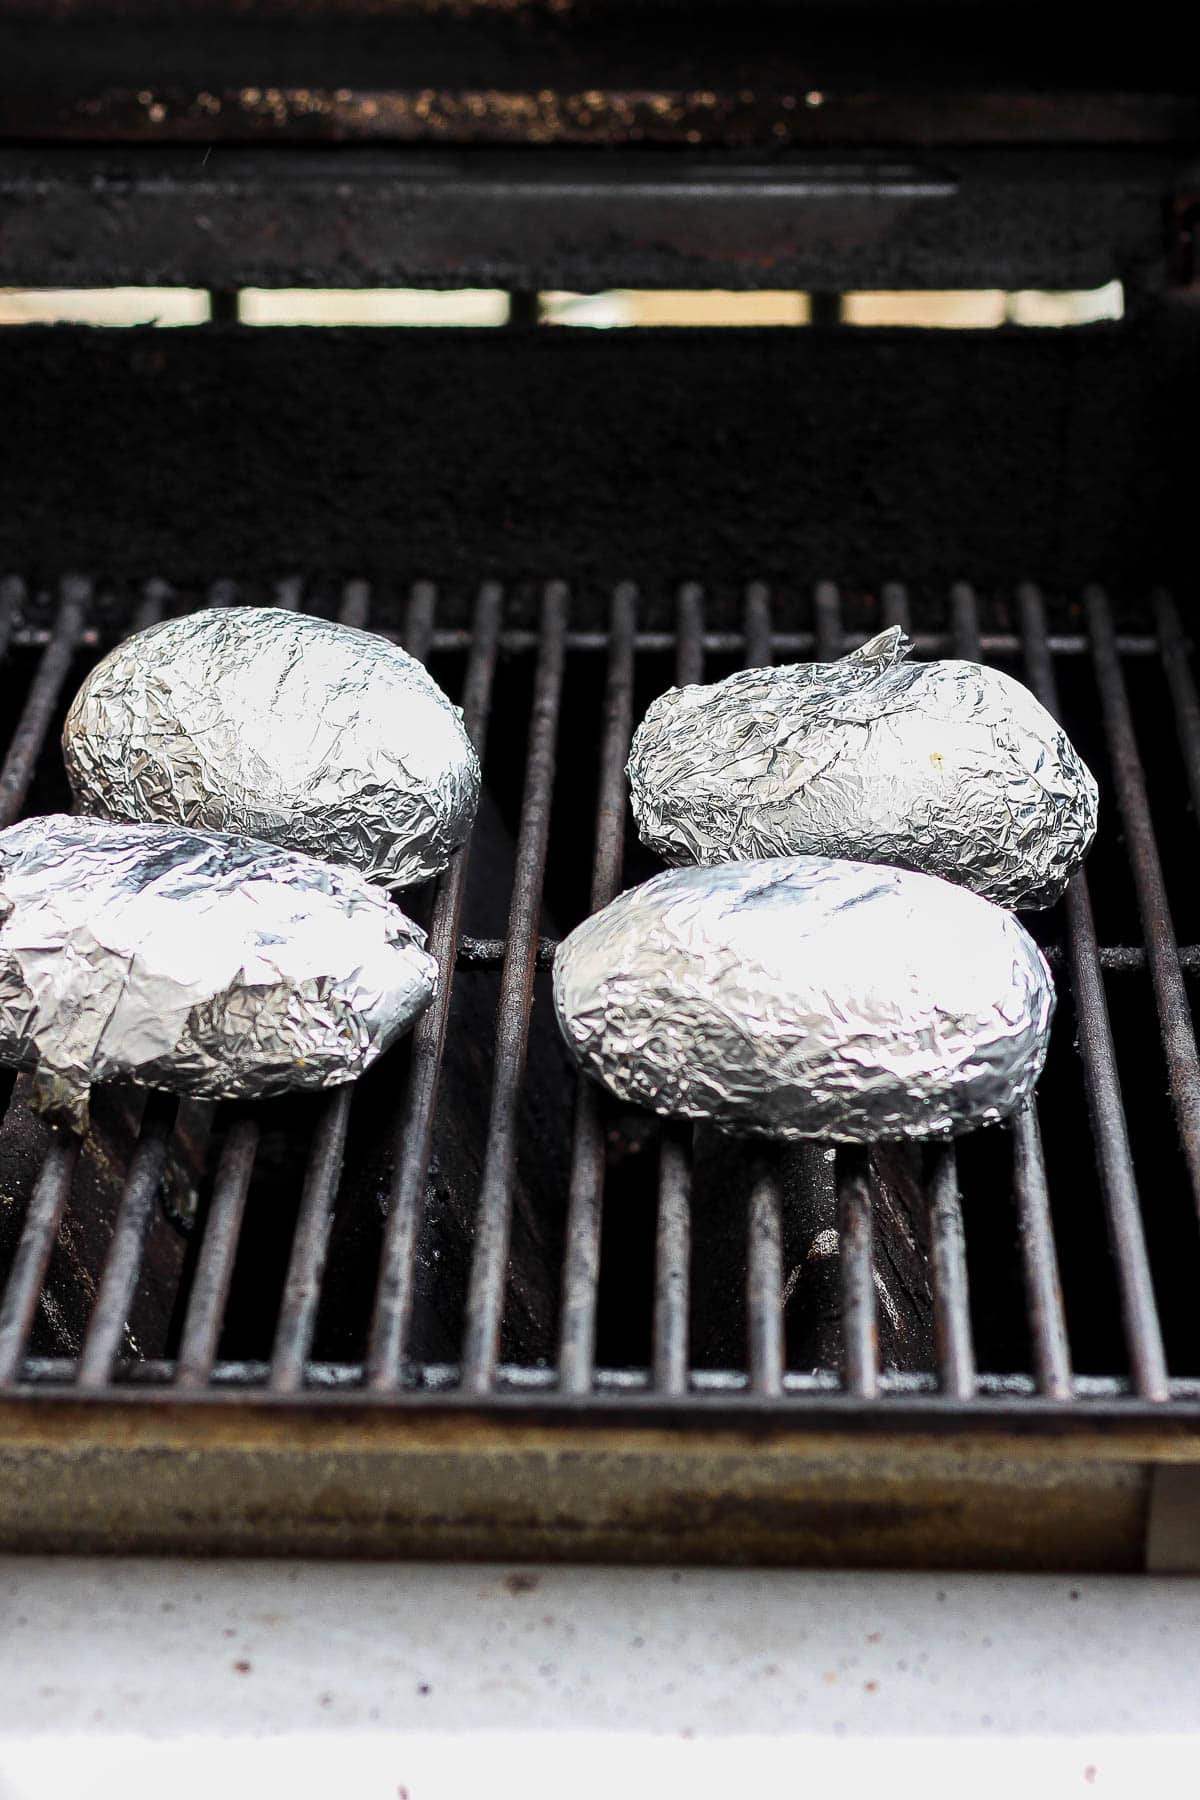 Four wrapped potatoes on the grill grates.